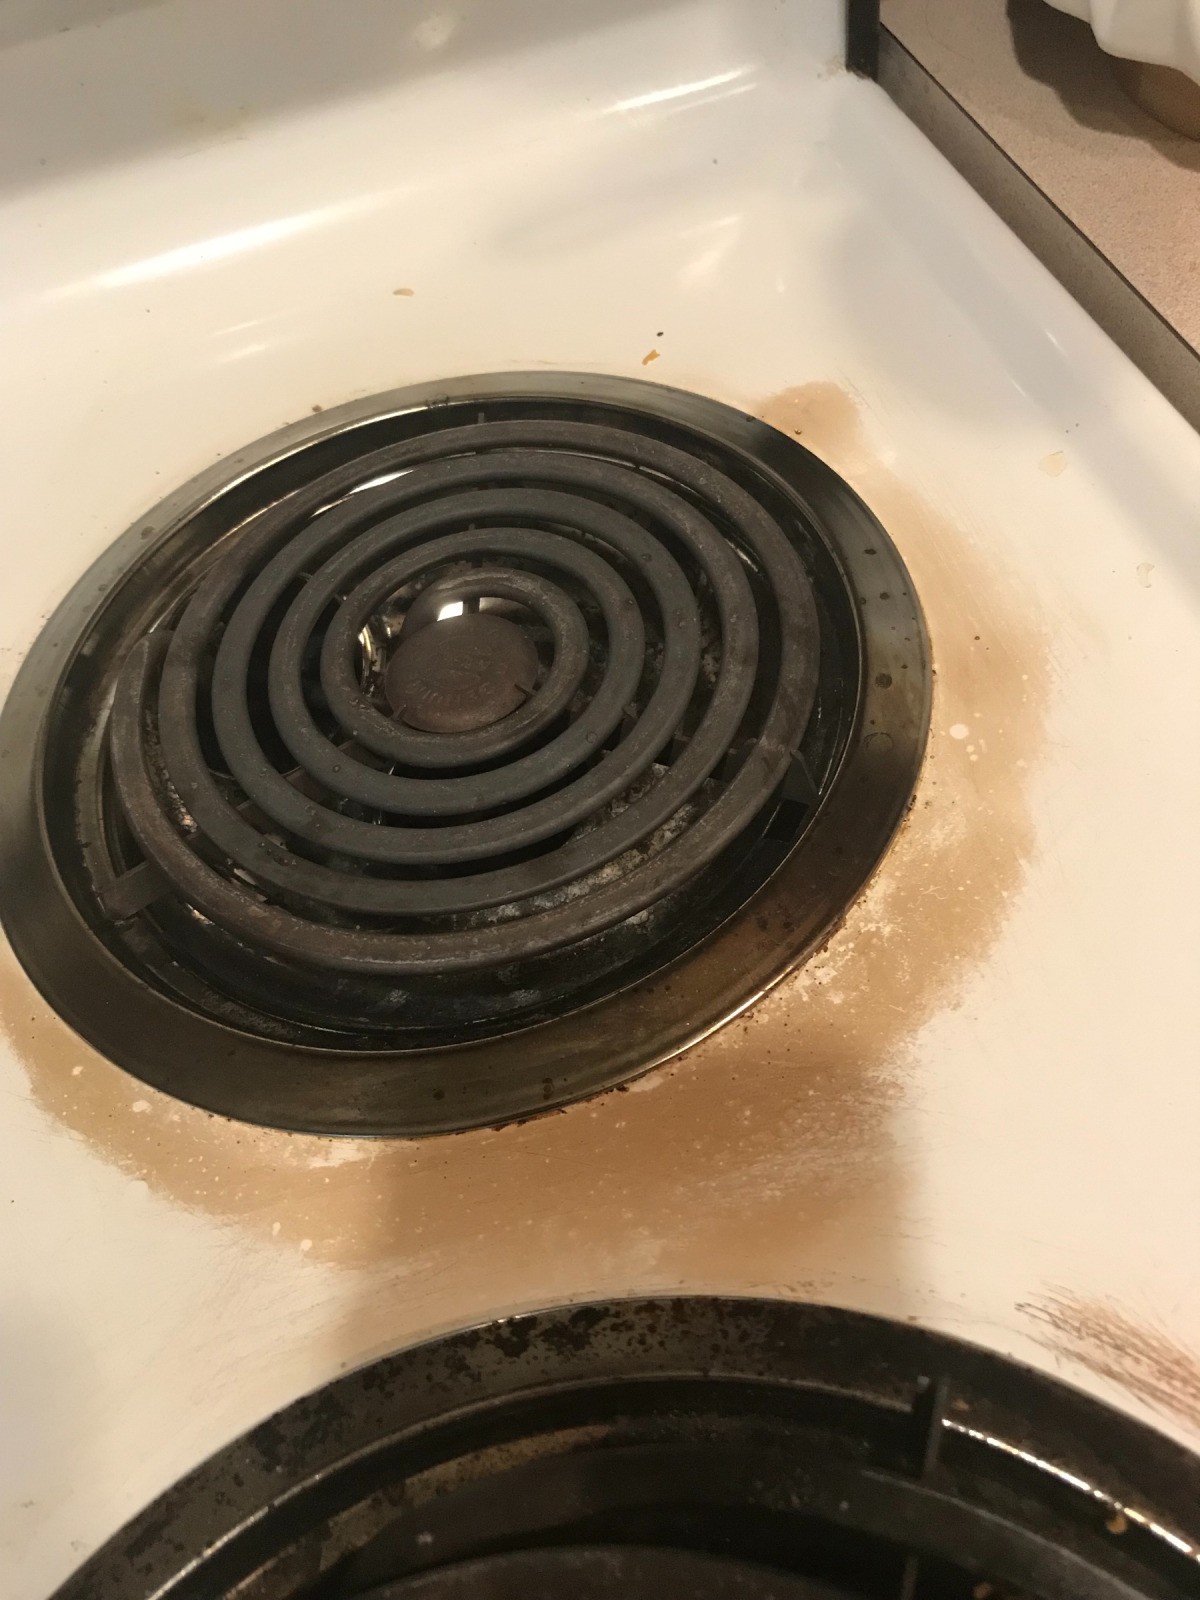 How to clean baked on grease from enamel stove top How To Clean A Burnt Enamel Top Stove Thriftyfun